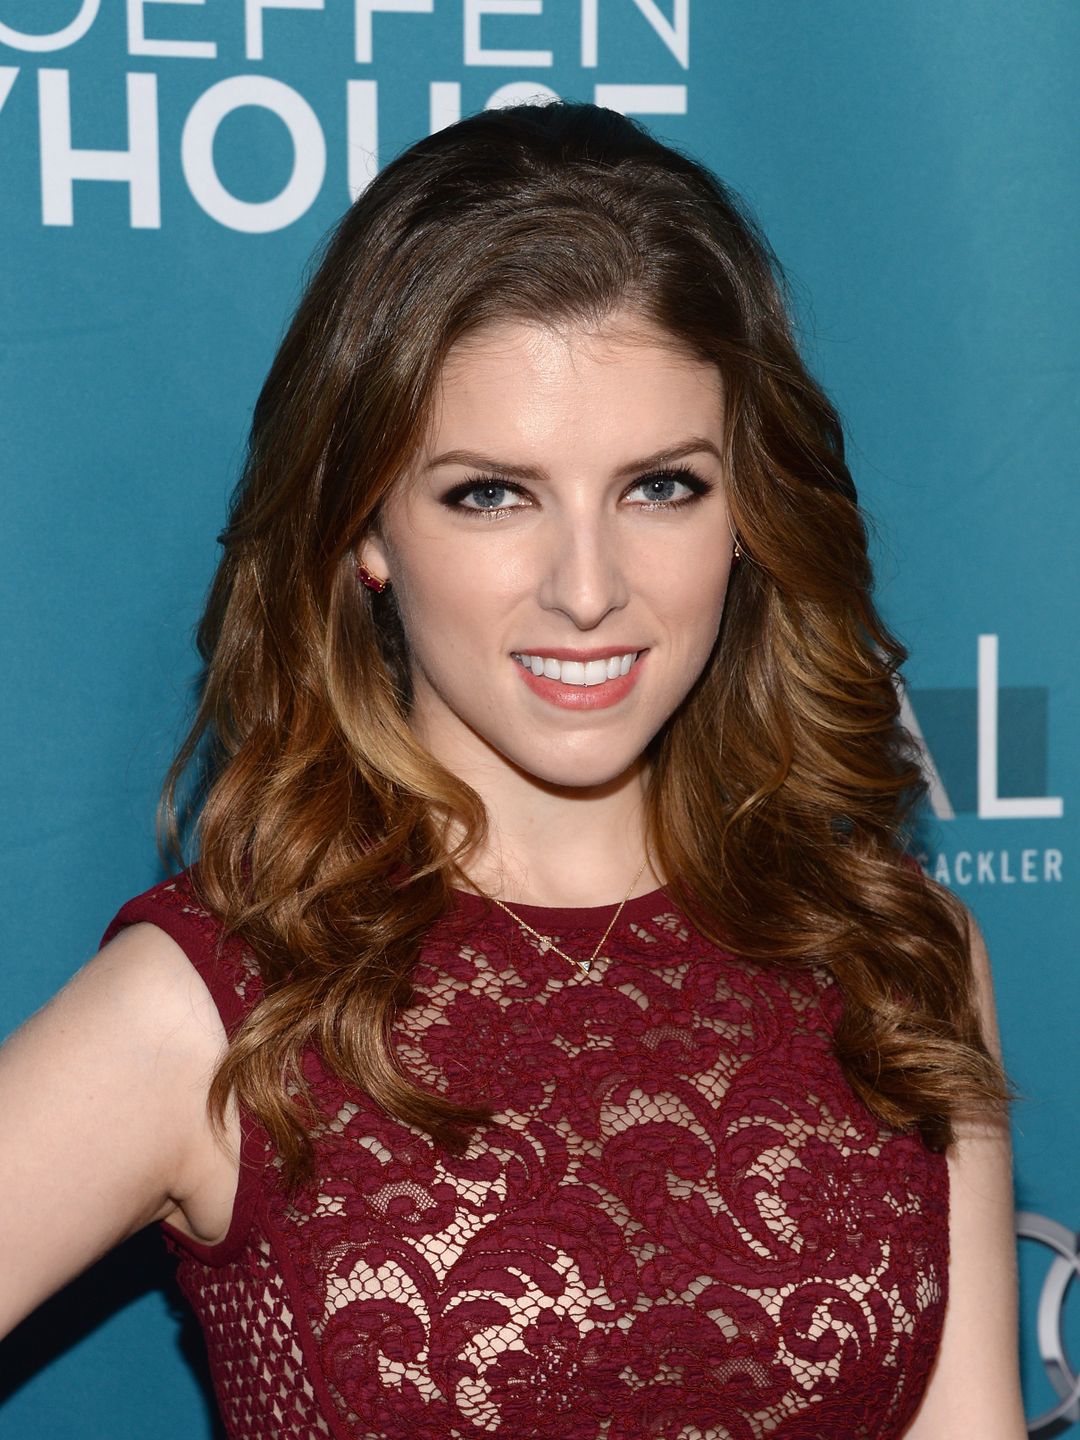 Anna Kendrick in her youth